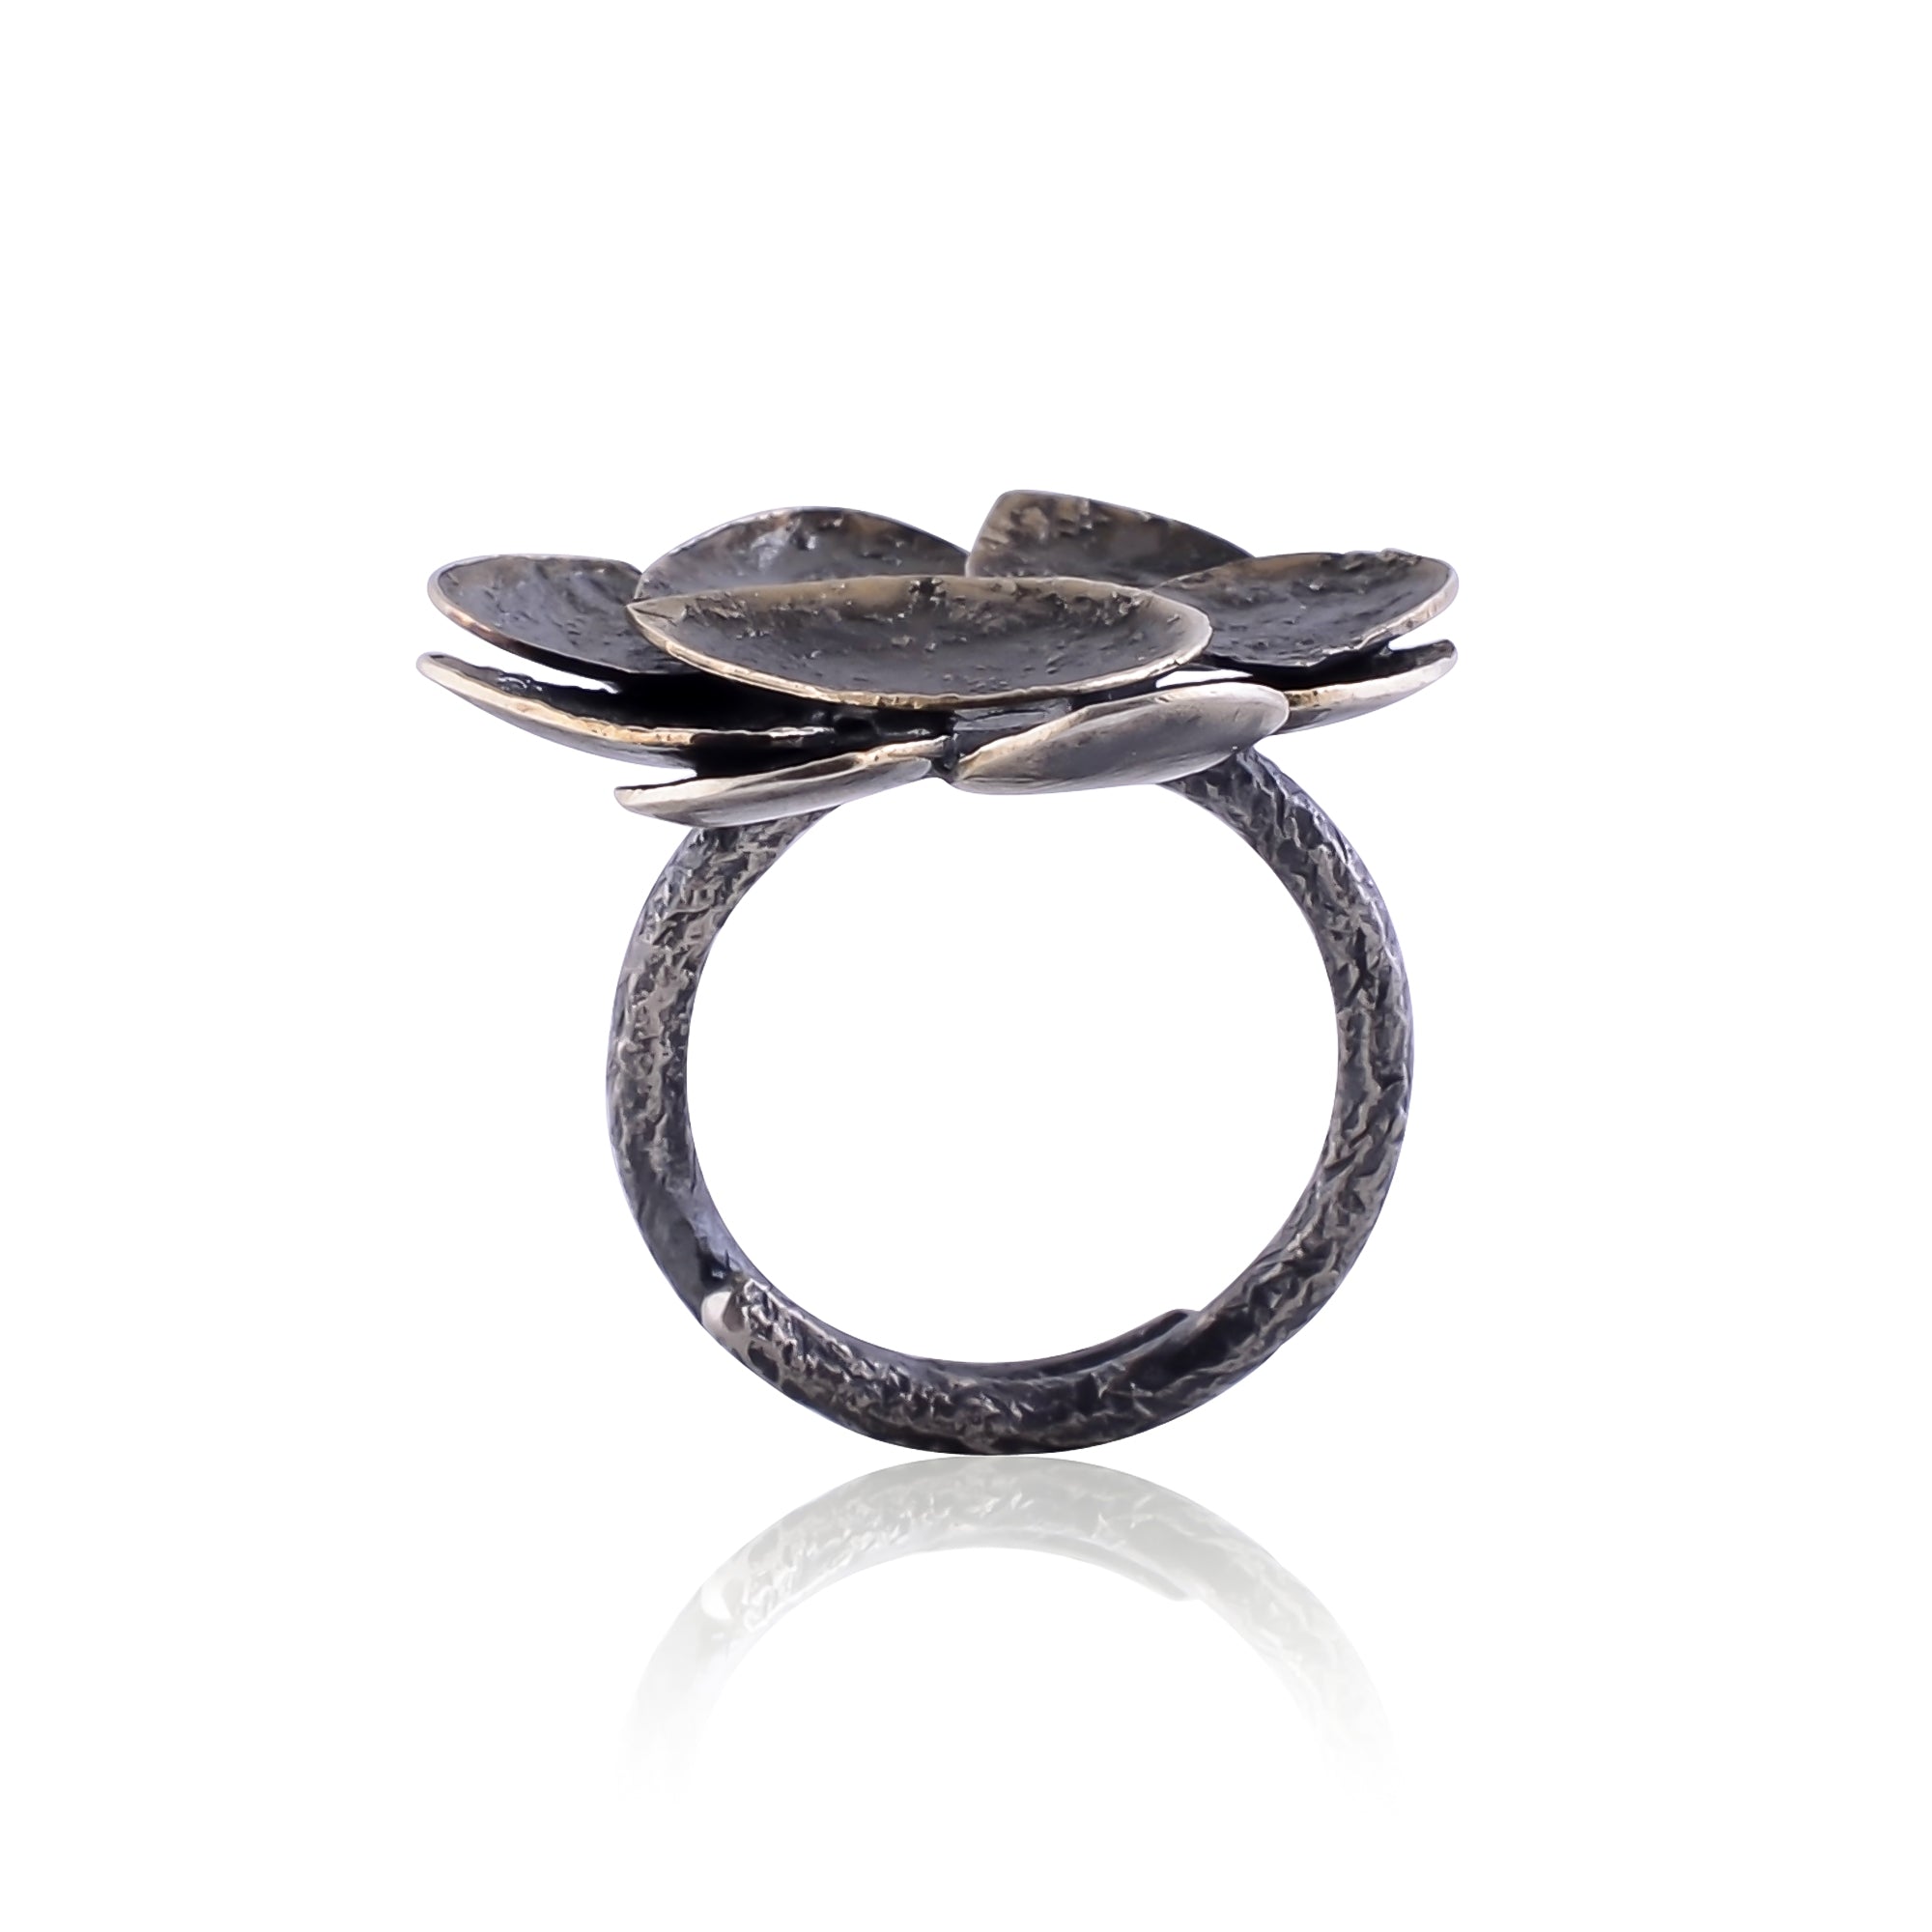 Hand Crafted Silver Black Plated Texture Leaf Ring